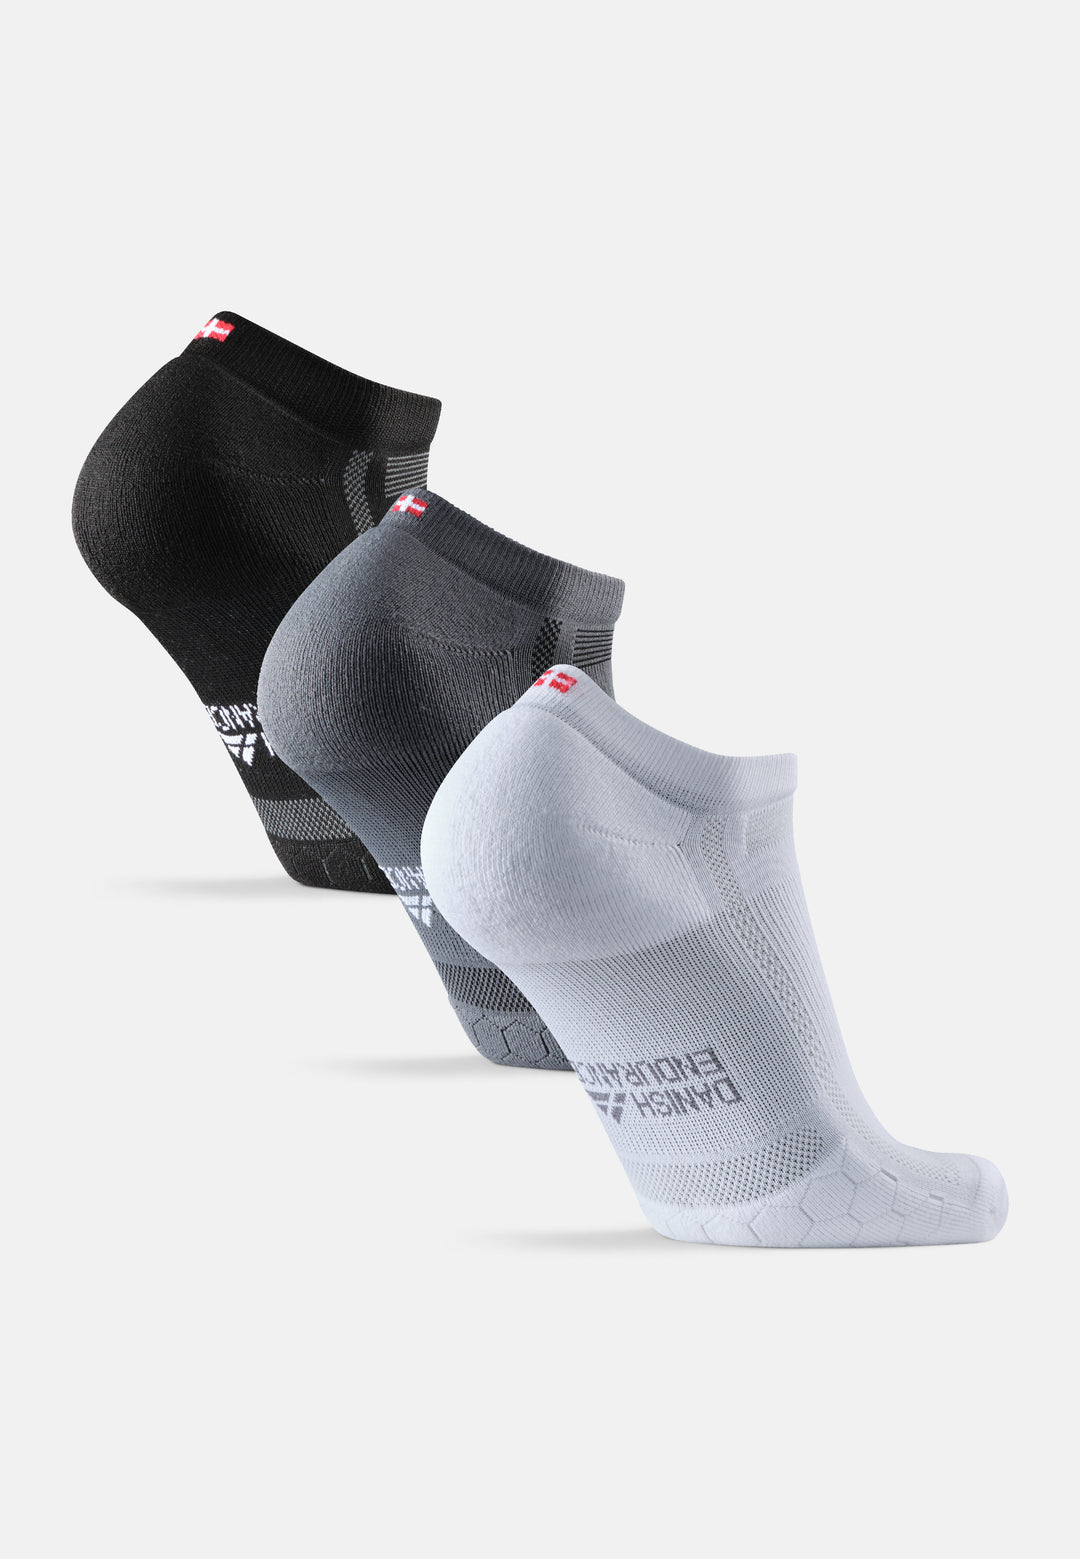 LOW-CUT RUNNING SOCKS FOR LONG DISTANCES